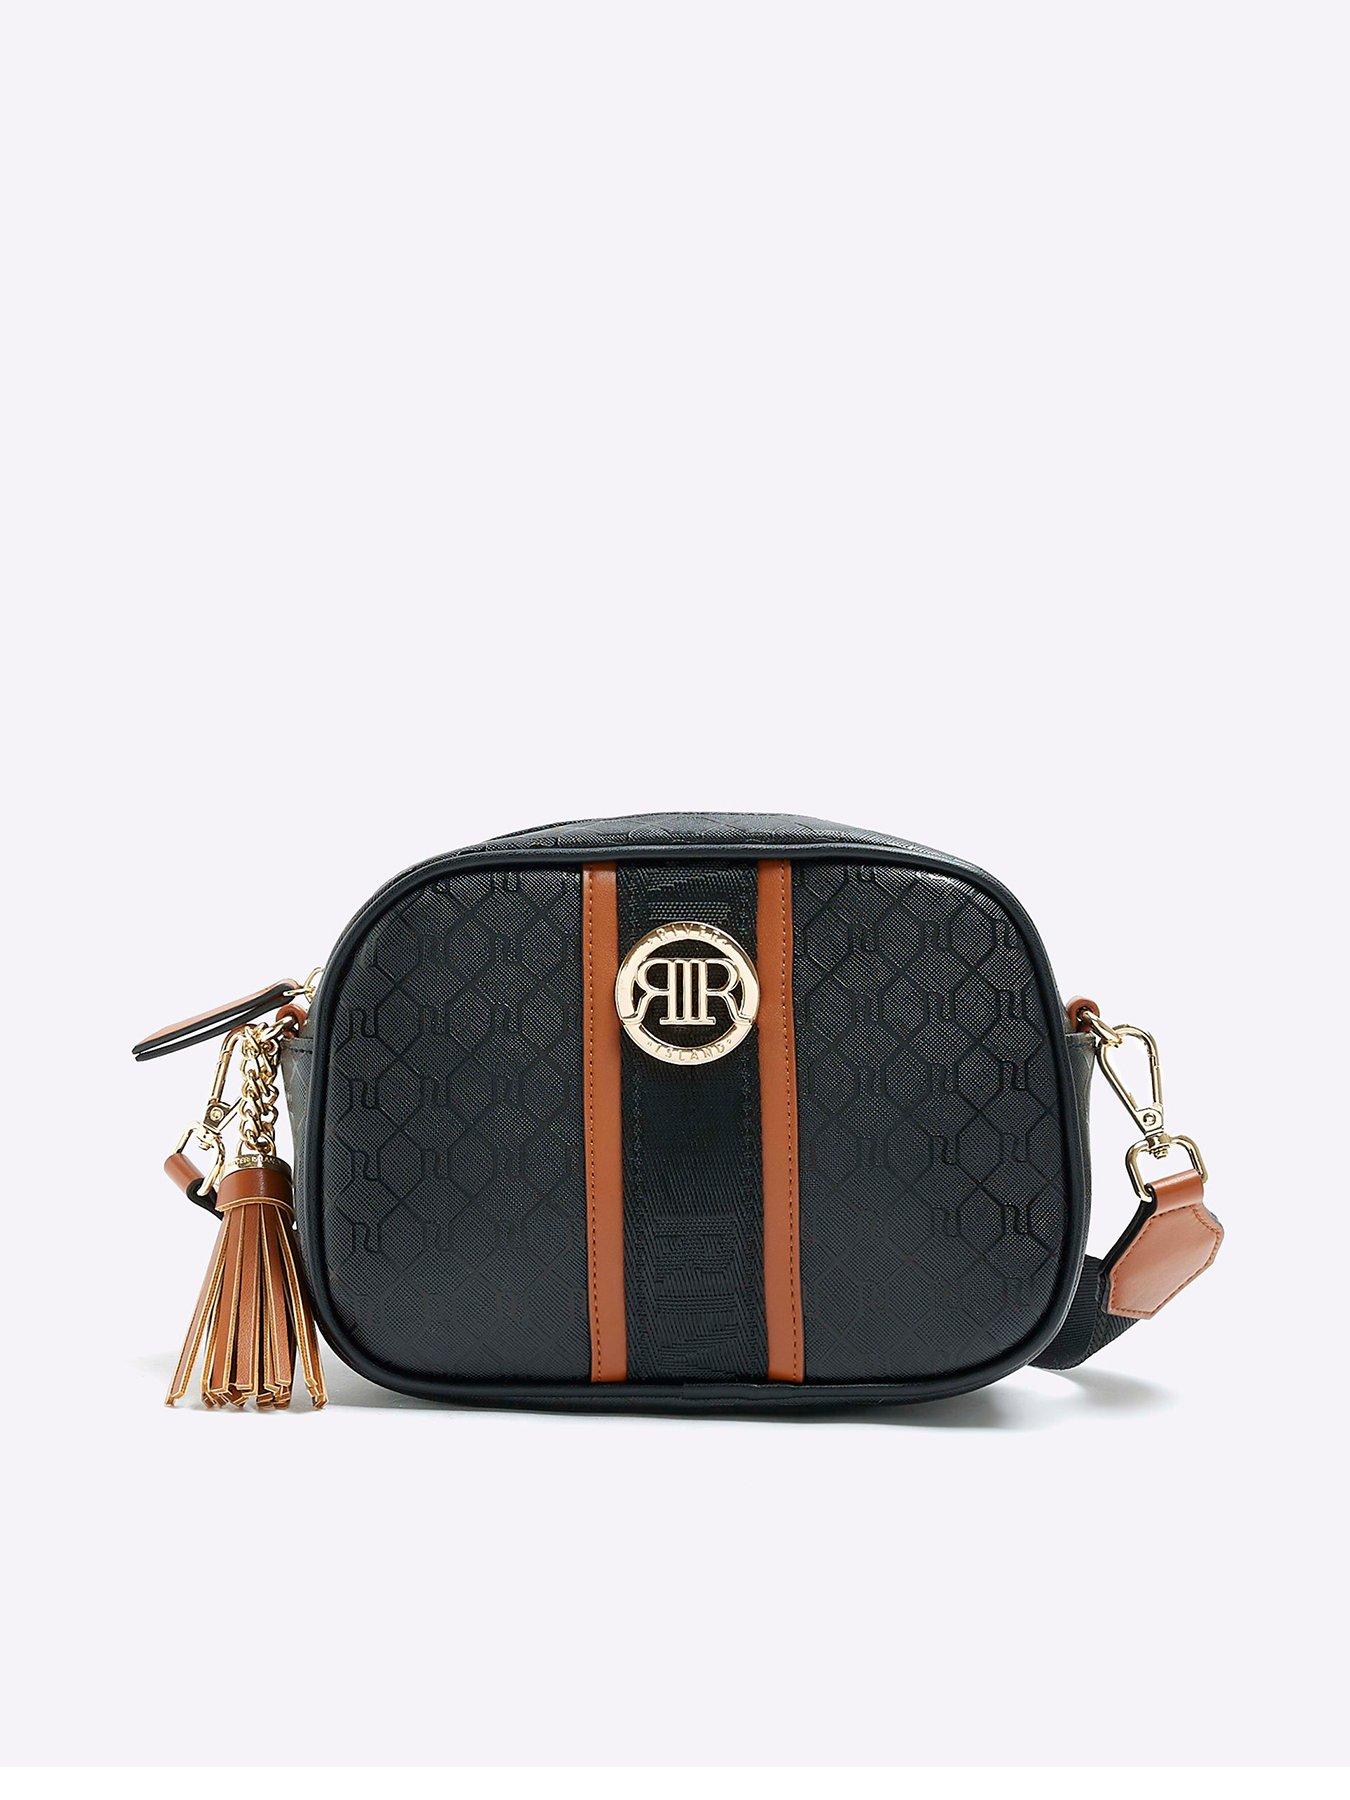 River Island cross body bag with contrast stitch and coin purse in black